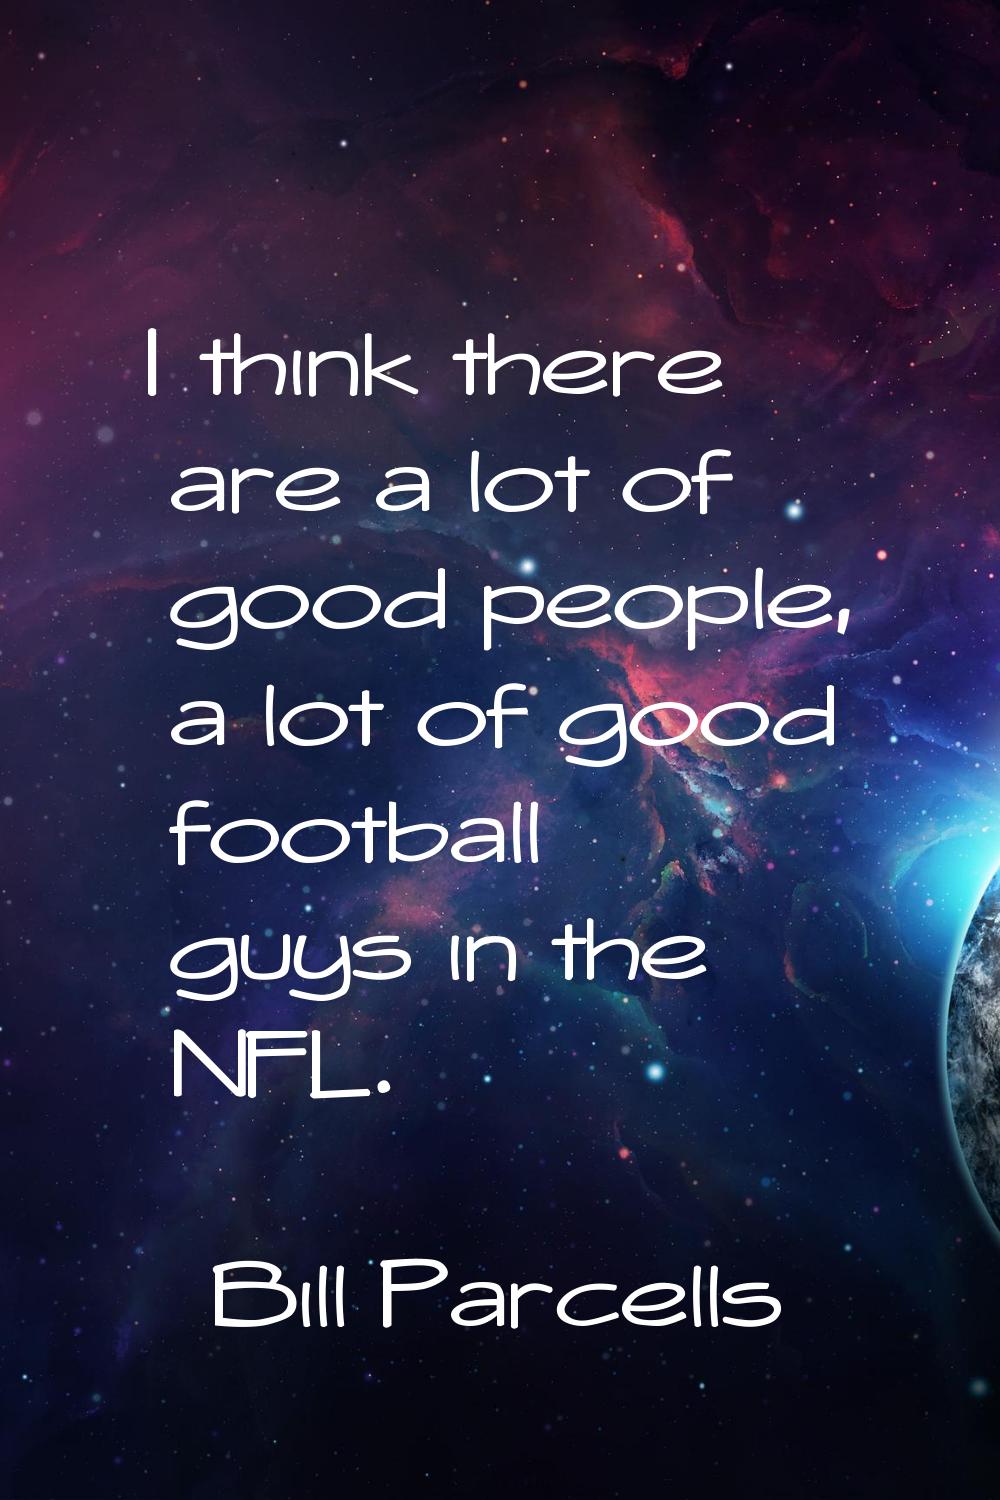 I think there are a lot of good people, a lot of good football guys in the NFL.